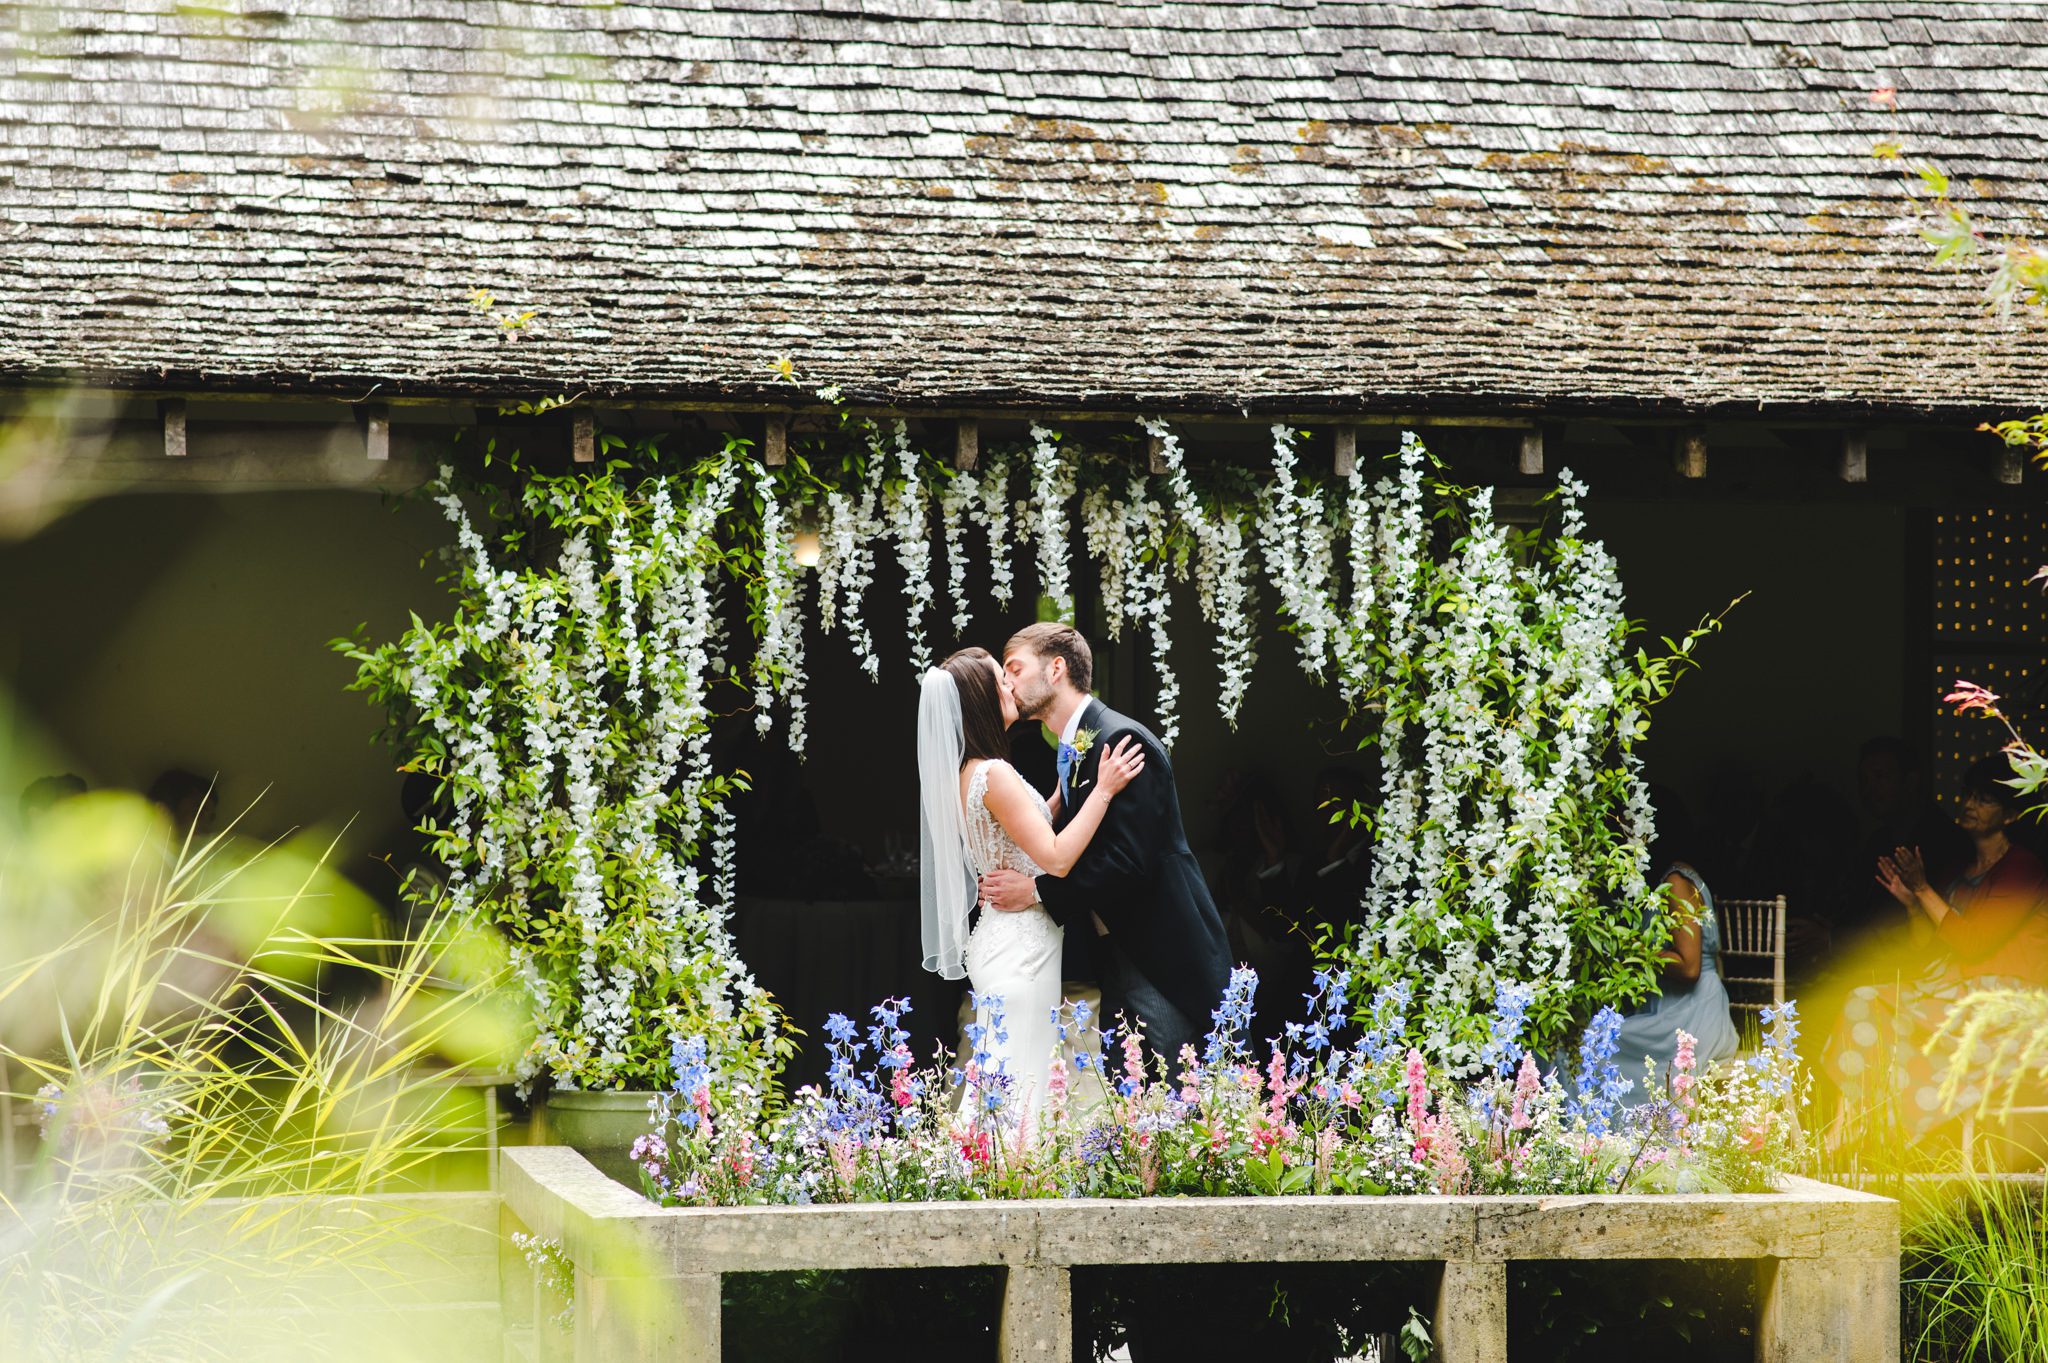 First kiss in the cloisters at Matara outdoor wedding ceremony